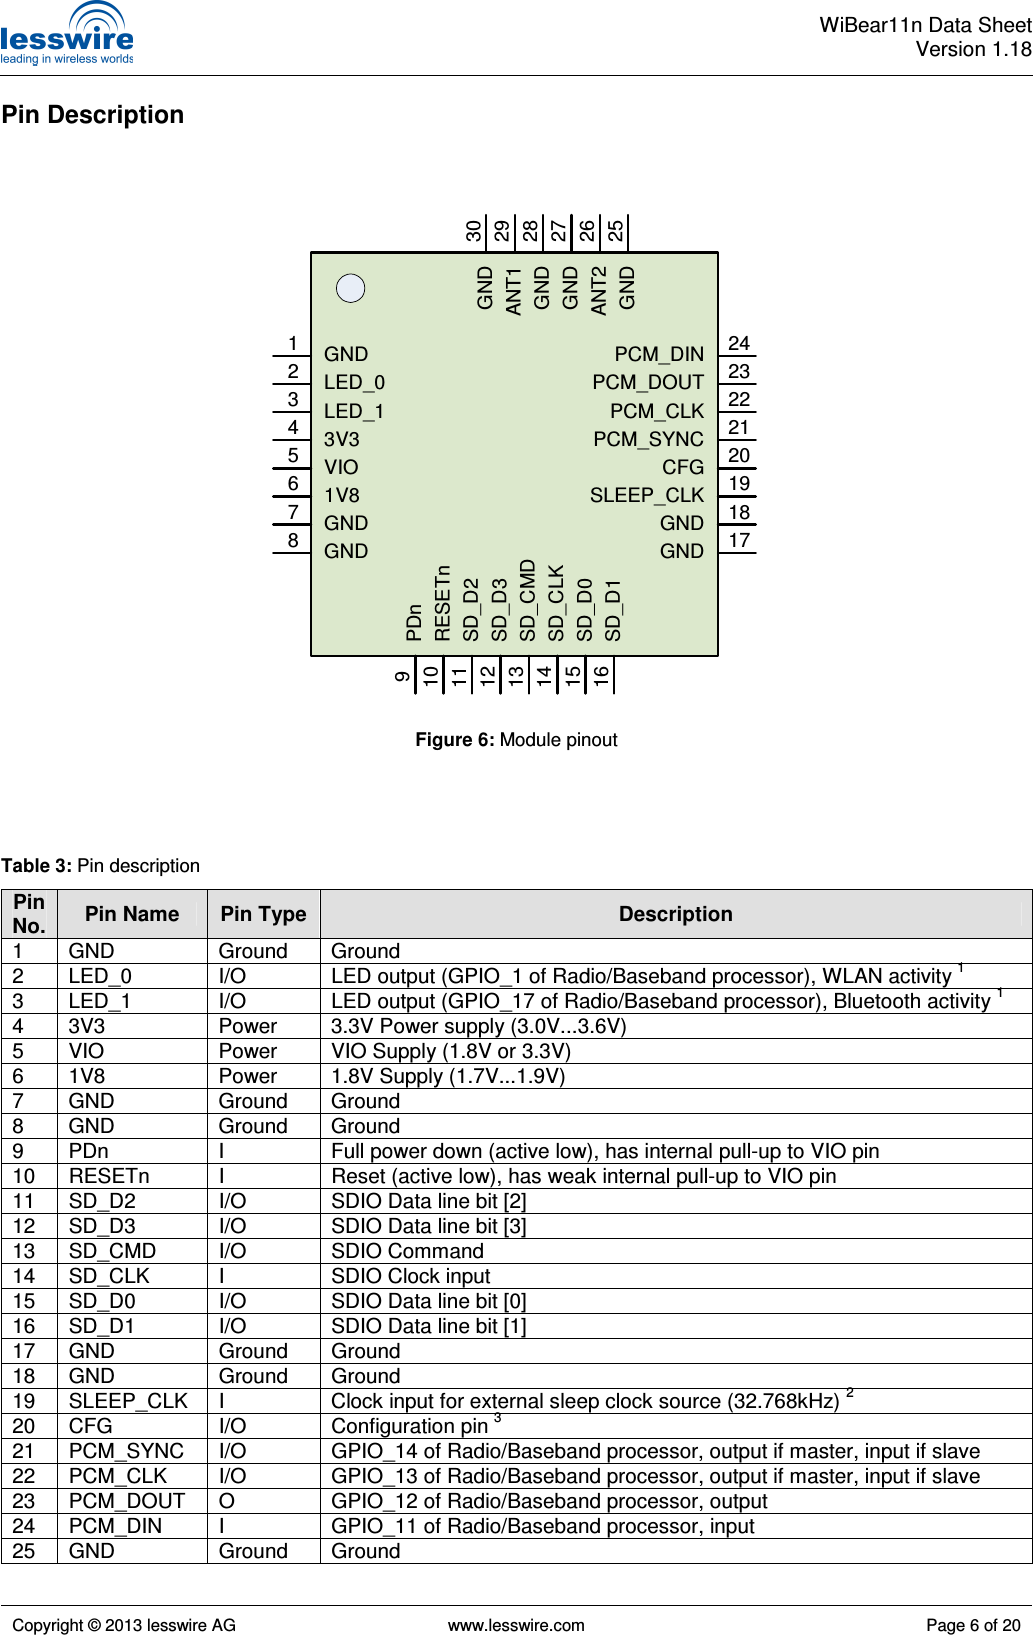  WiBear11n Data SheetVersion 1.18   Copyright © 2013 lesswire AG   www.lesswire.com  Page 6 of 20  Pin Description                                Table 3: Pin description Pin No. Pin Name  Pin Type  Description 1  GND  Ground  Ground 2  LED_0  I/O  LED output (GPIO_1 of Radio/Baseband processor), WLAN activity 1 3  LED_1  I/O  LED output (GPIO_17 of Radio/Baseband processor), Bluetooth activity 1 4  3V3  Power  3.3V Power supply (3.0V...3.6V) 5  VIO  Power  VIO Supply (1.8V or 3.3V) 6  1V8  Power  1.8V Supply (1.7V...1.9V) 7  GND  Ground  Ground 8  GND  Ground  Ground 9  PDn  I  Full power down (active low), has internal pull-up to VIO pin 10  RESETn  I  Reset (active low), has weak internal pull-up to VIO pin 11  SD_D2  I/O  SDIO Data line bit [2] 12  SD_D3  I/O  SDIO Data line bit [3] 13  SD_CMD  I/O  SDIO Command 14  SD_CLK  I  SDIO Clock input 15  SD_D0  I/O  SDIO Data line bit [0] 16  SD_D1  I/O  SDIO Data line bit [1] 17  GND  Ground  Ground 18  GND  Ground  Ground 19  SLEEP_CLK  I  Clock input for external sleep clock source (32.768kHz) 2 20  CFG  I/O  Configuration pin 3 21  PCM_SYNC  I/O  GPIO_14 of Radio/Baseband processor, output if master, input if slave 22  PCM_CLK  I/O  GPIO_13 of Radio/Baseband processor, output if master, input if slave 23  PCM_DOUT  O  GPIO_12 of Radio/Baseband processor, output 24  PCM_DIN  I  GPIO_11 of Radio/Baseband processor, input 25  GND  Ground  Ground GNDLED_0LED_13V3VIO1V8GNDGND12345678PDnRESETnSD_D2SD_D3SD_CMDSD_CLKSD_D0SD_D11415161011121392423222120191817GNDGNDSLEEP_CLKCFGPCM_SYNCPCM_CLKPCM_DOUTPCM_DIN302928272625GNDANT2GNDGNDANT1GNDFigure 6: Module pinout 